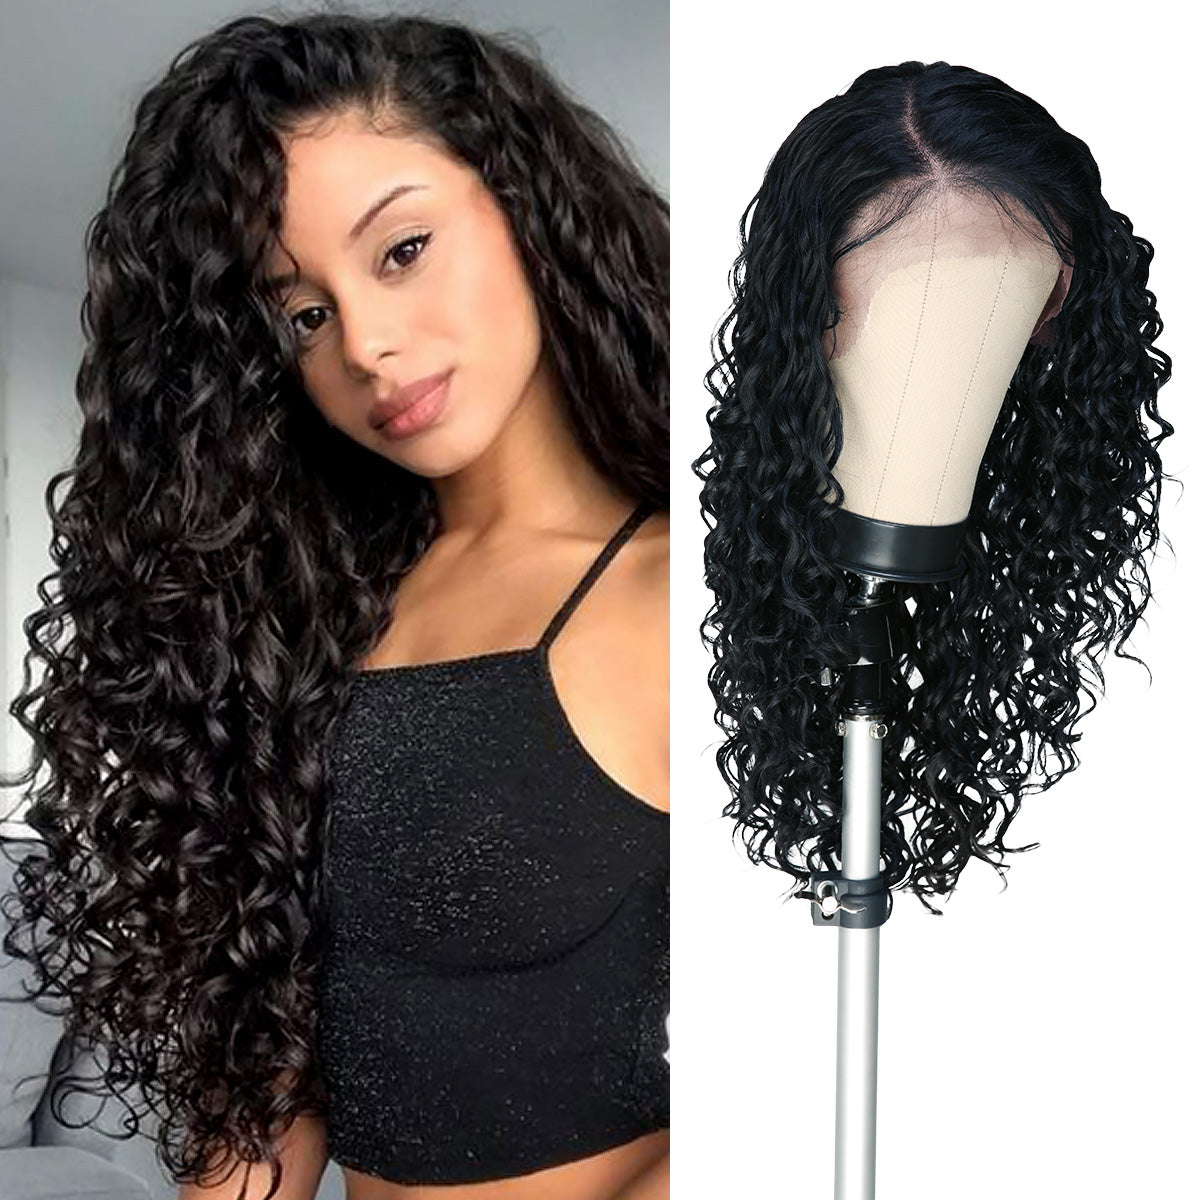 Multi-Parting, 13X6, Human Hair Blend, Frontal Wig, Invisible Lace, Pre-Plucked, Curly Wig, Rodded Curls, Ringlet Curl Pattern, Layered Curly Wig, Volume Wigs,